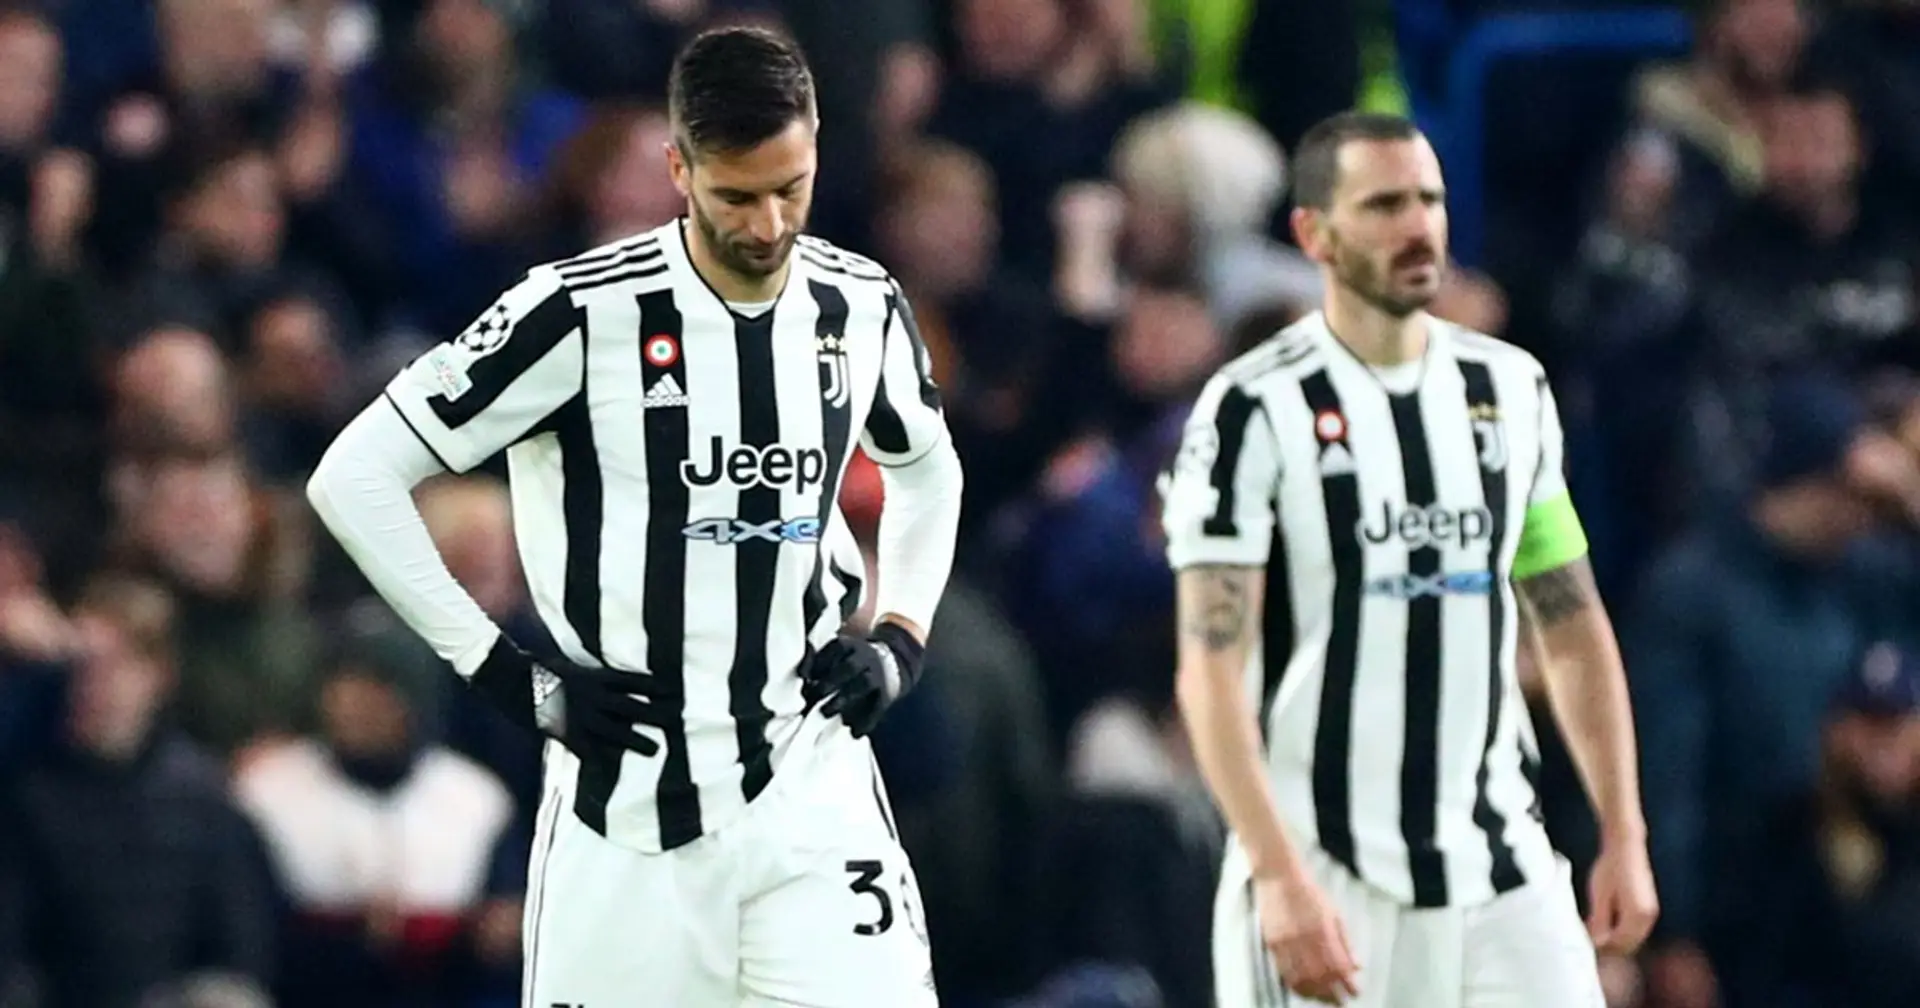 Juventus 'could be relegated and have Scudettos revoked' if found guilty of illegal financial activity